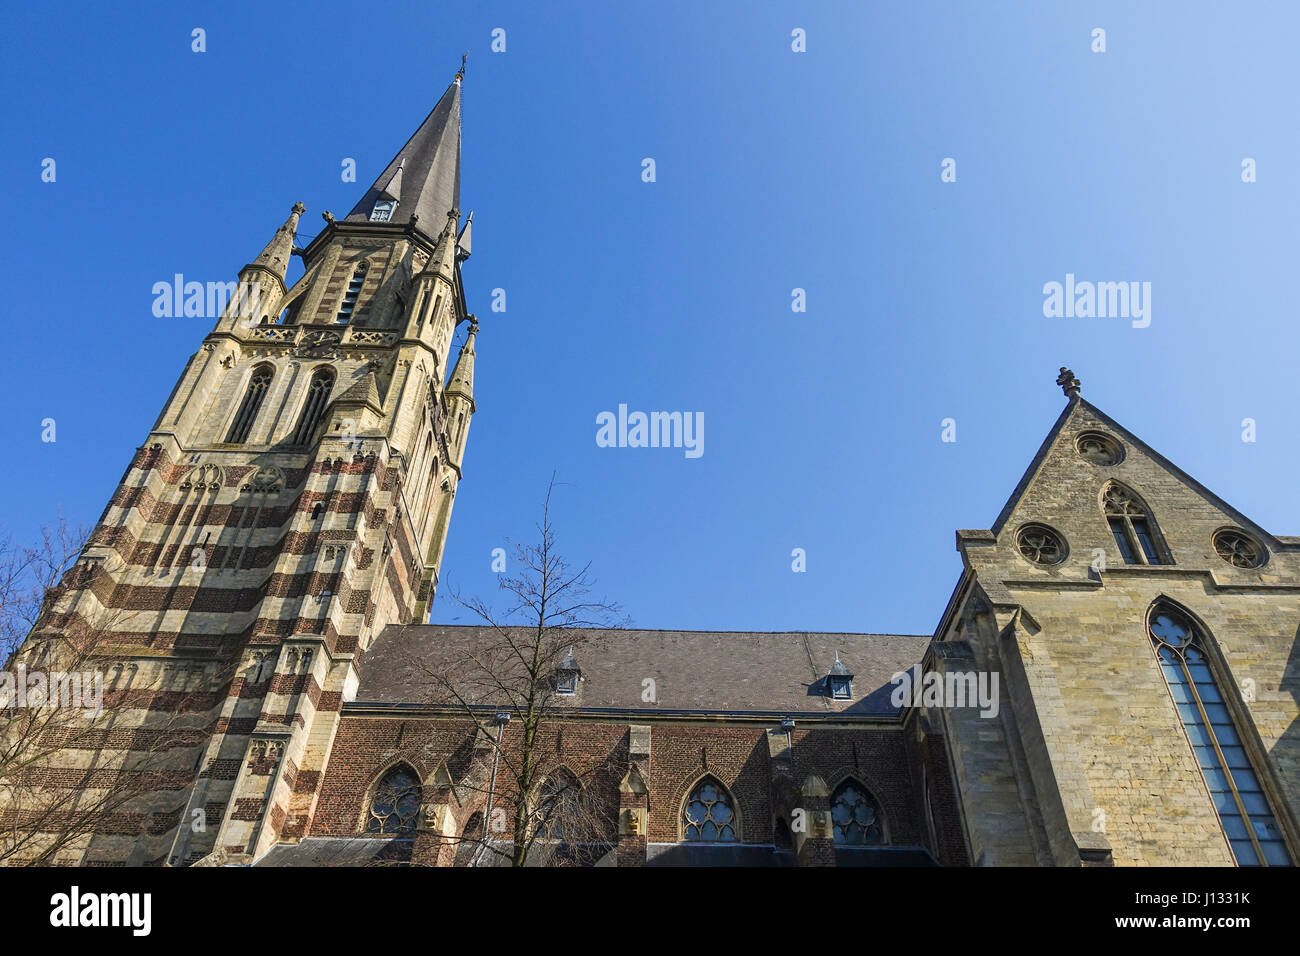 The Gothic St. Petruskerk, St Peter's church of Sittard in the province of Limburg, Netherlands. Stock Photo